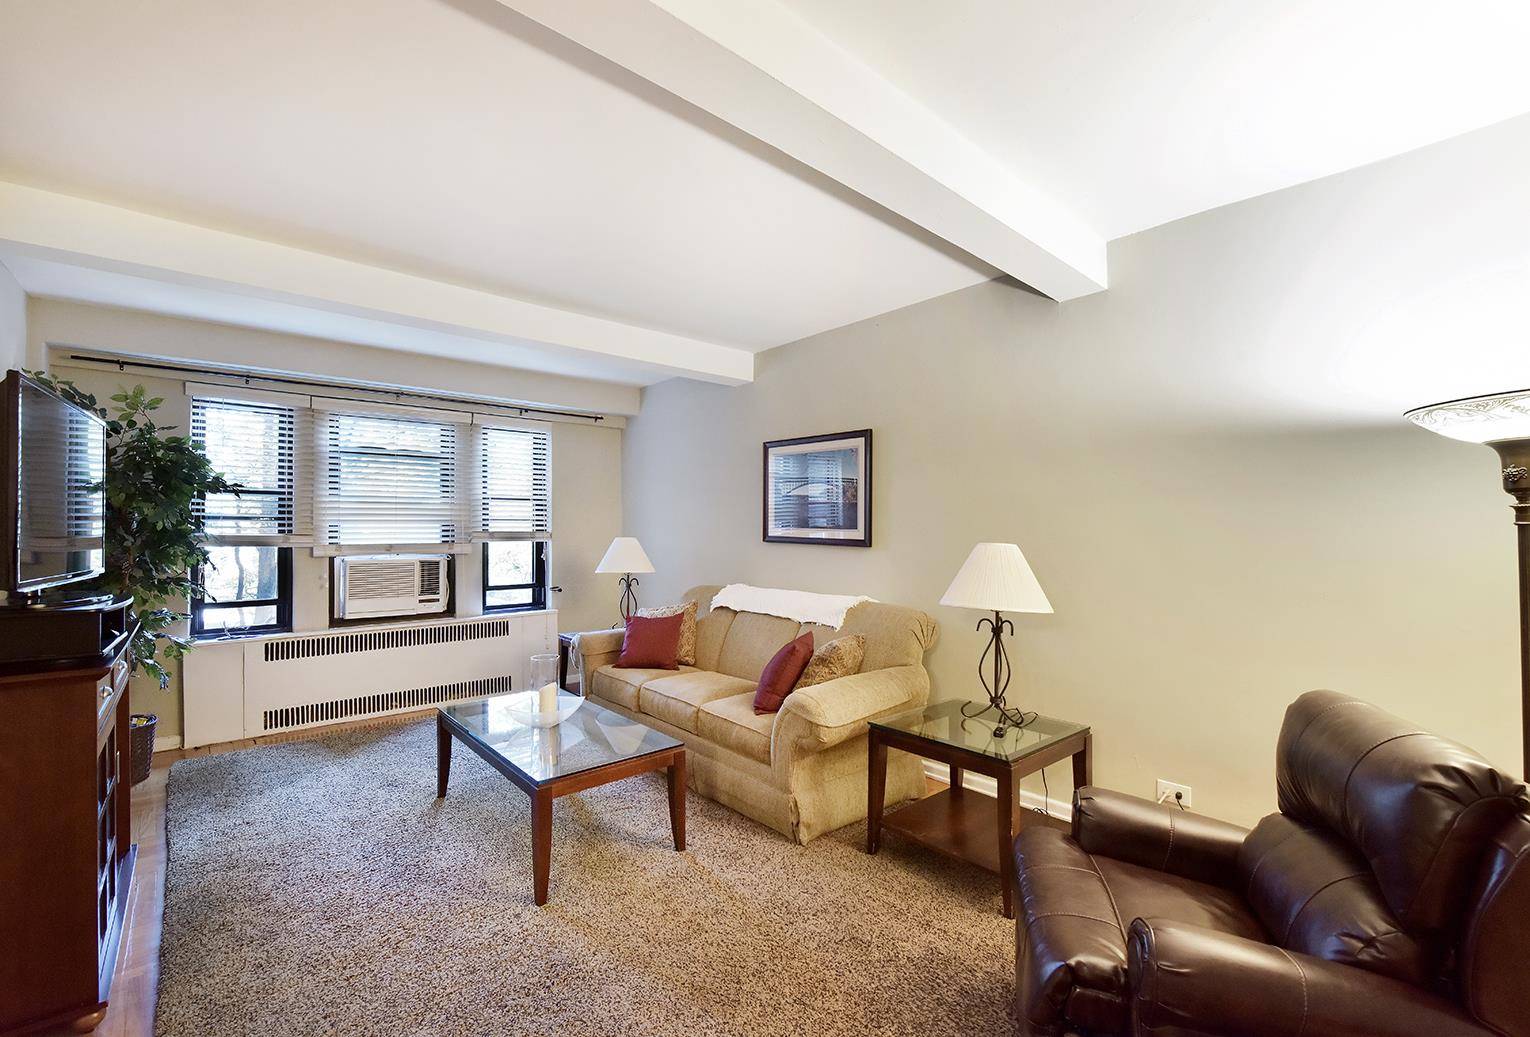 Park Terrace Gardens has features no other cooperative in Inwood can offer including concierge services, private gardens, common roof terrace and free high speed internet access.